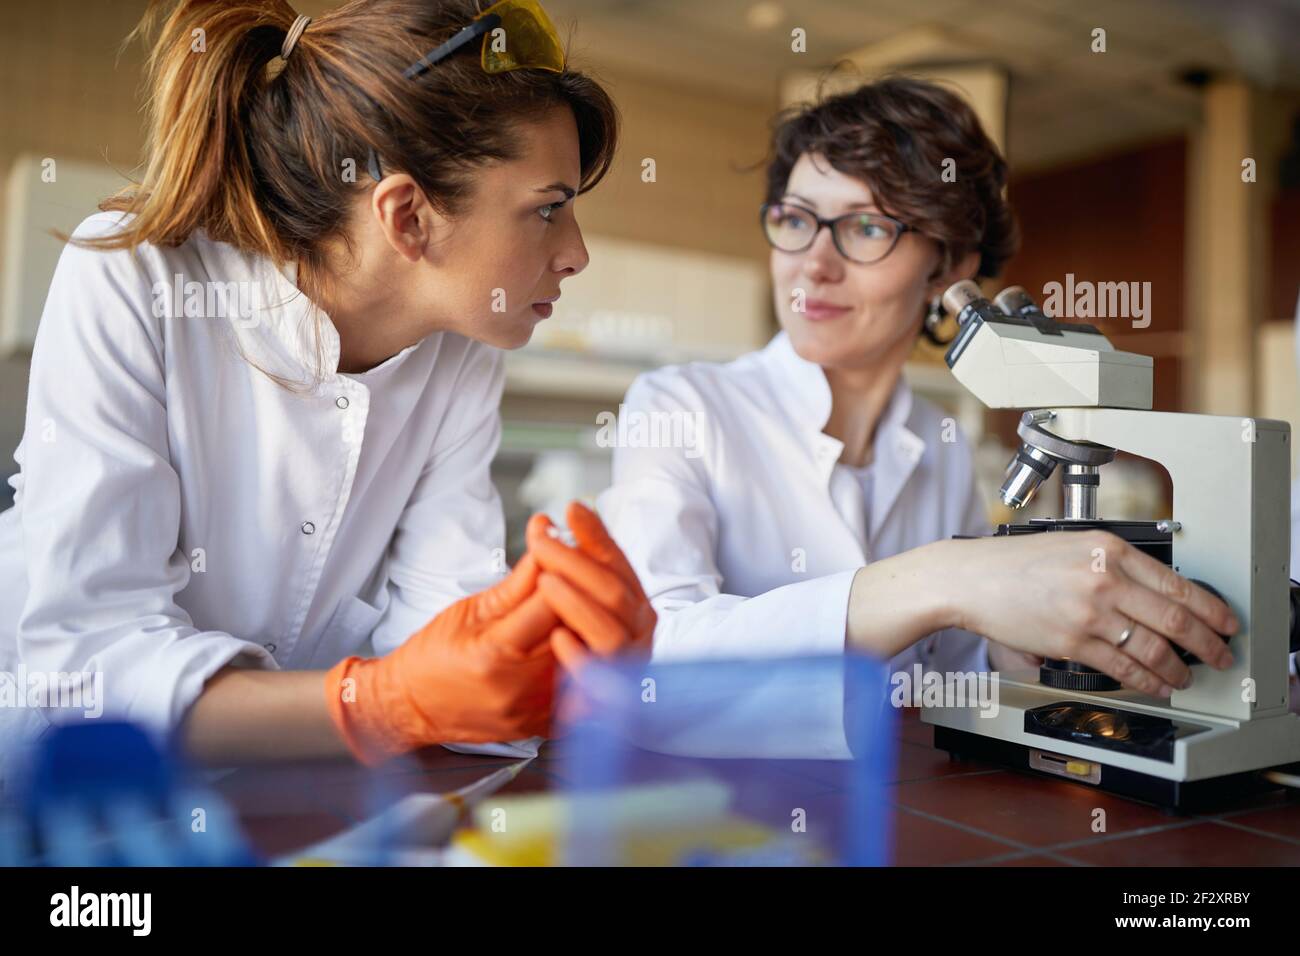 Two female laborant practitioners analyzing samples for analysis Stock Photo